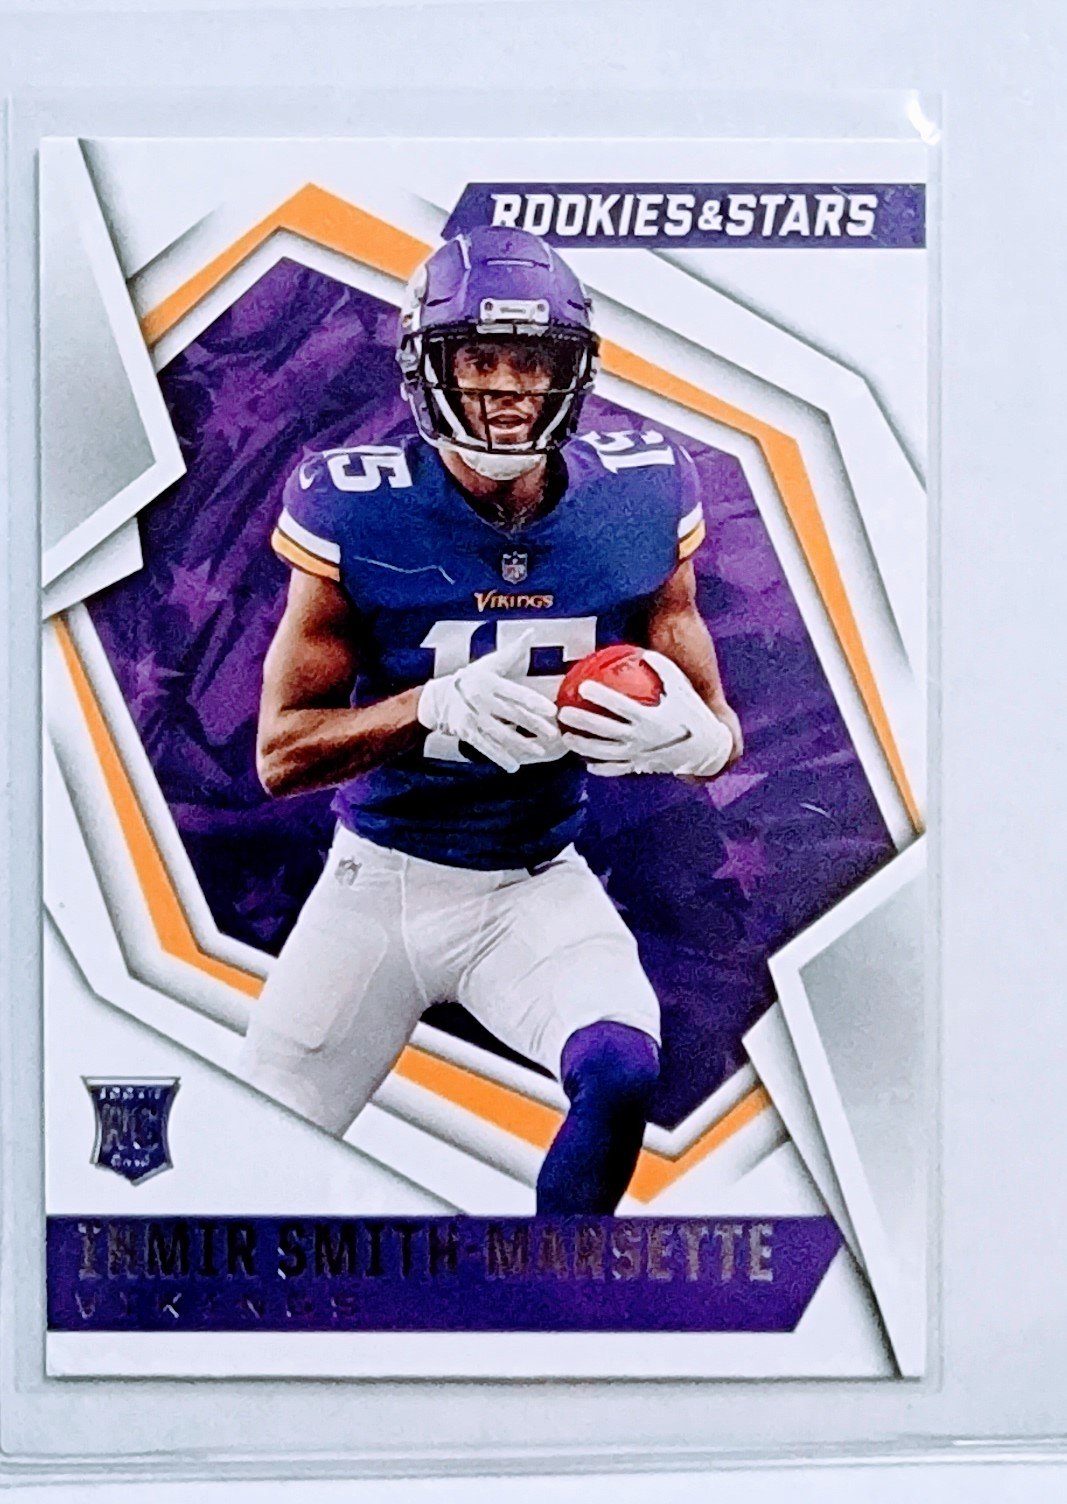 2021 Panini Rookies and Stars Ihmer Smith Marsette Rookie Football Card AVM1 simple Xclusive Collectibles   